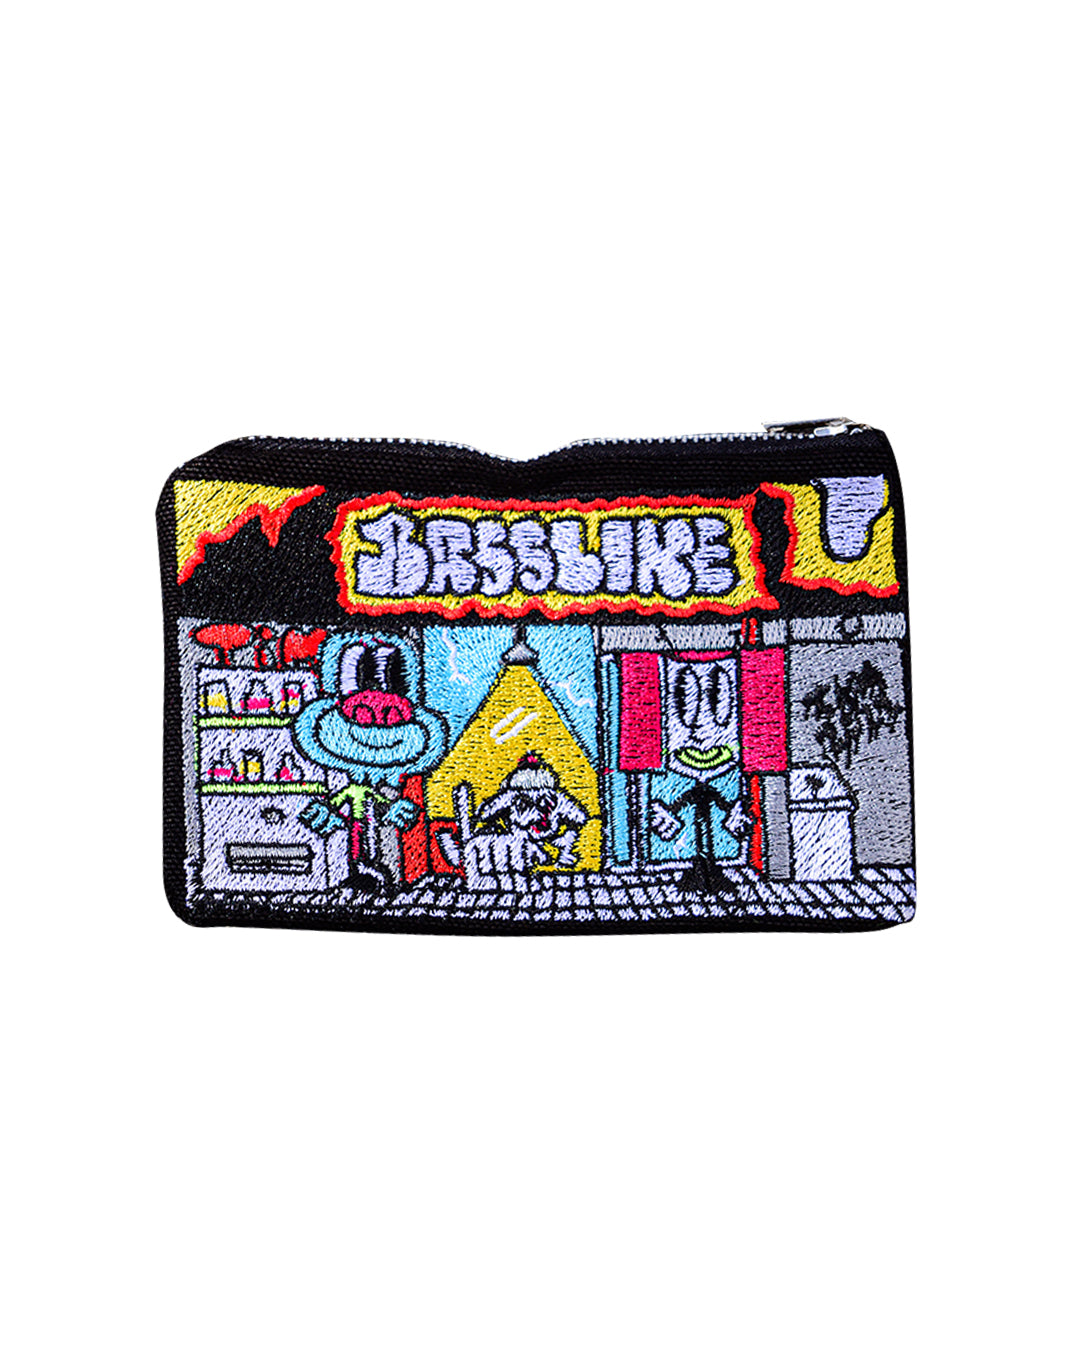 Tim Comix coming to Bassline Coin Case